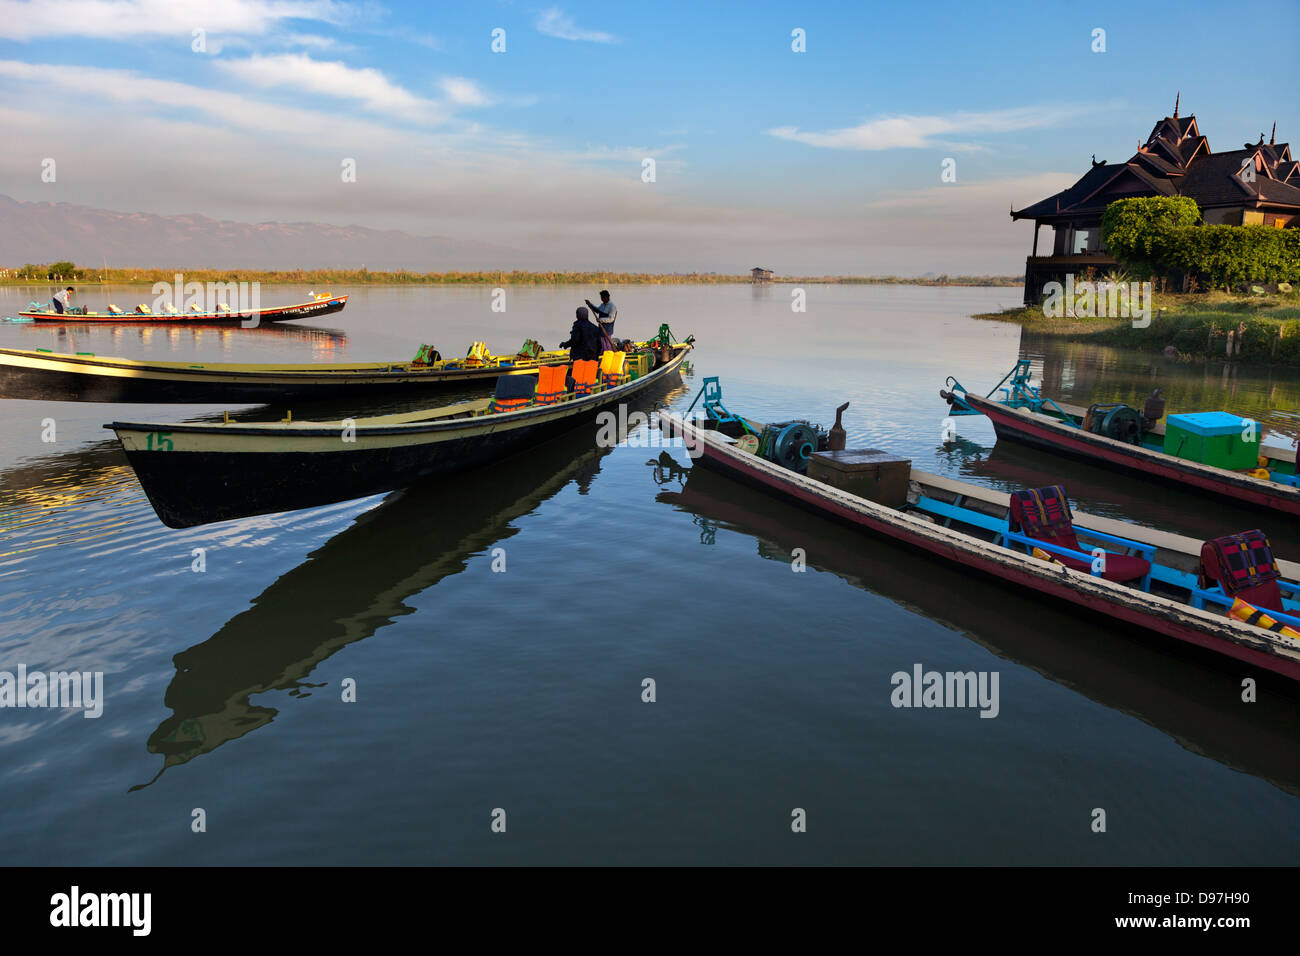 Boats moored by the Lake Inle Resort at sunset, Myanmar Stock Photo